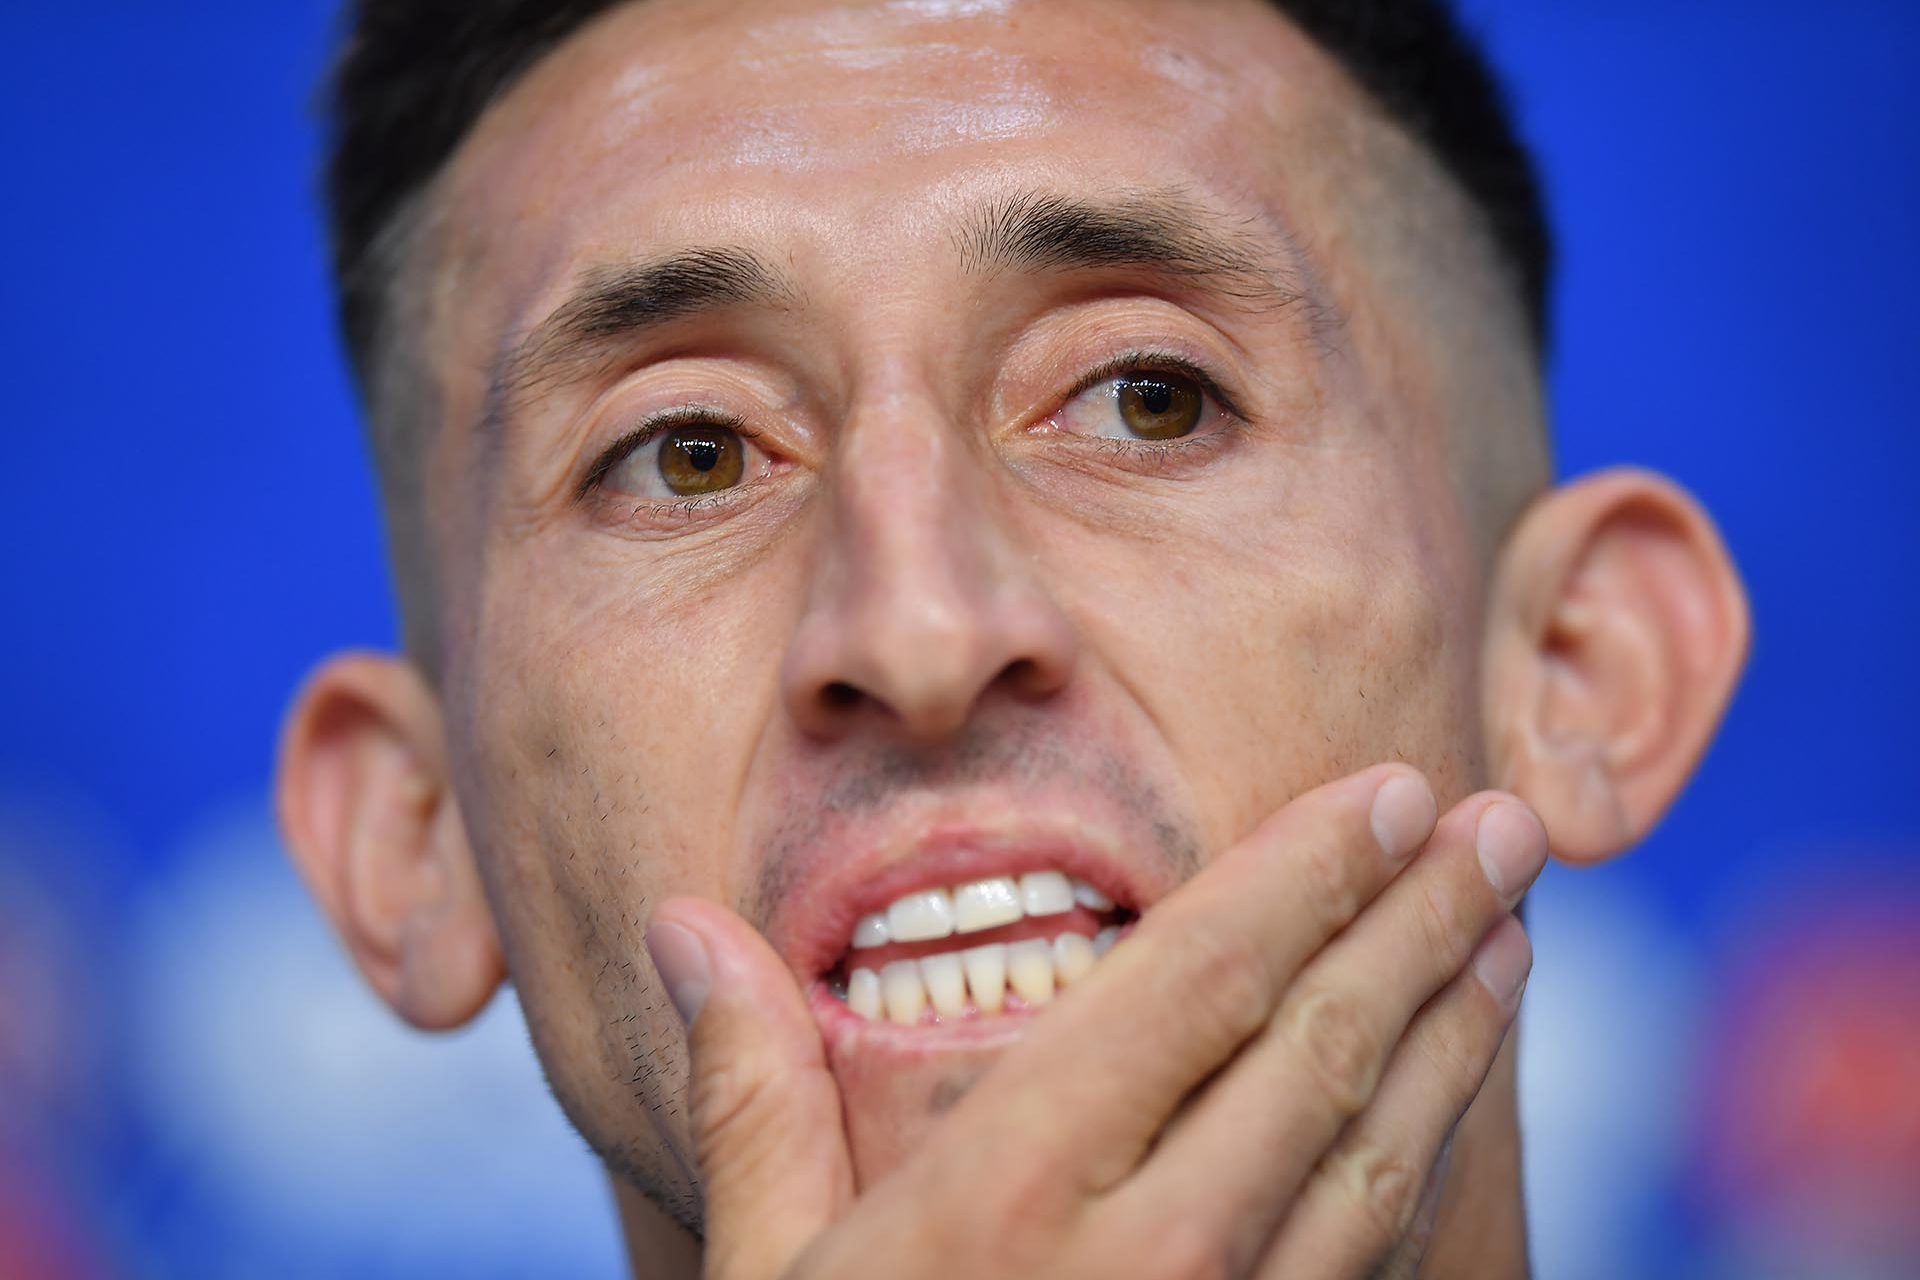 The remarkable transformation of Mexican footballer Héctor Herrera everyone is talking about